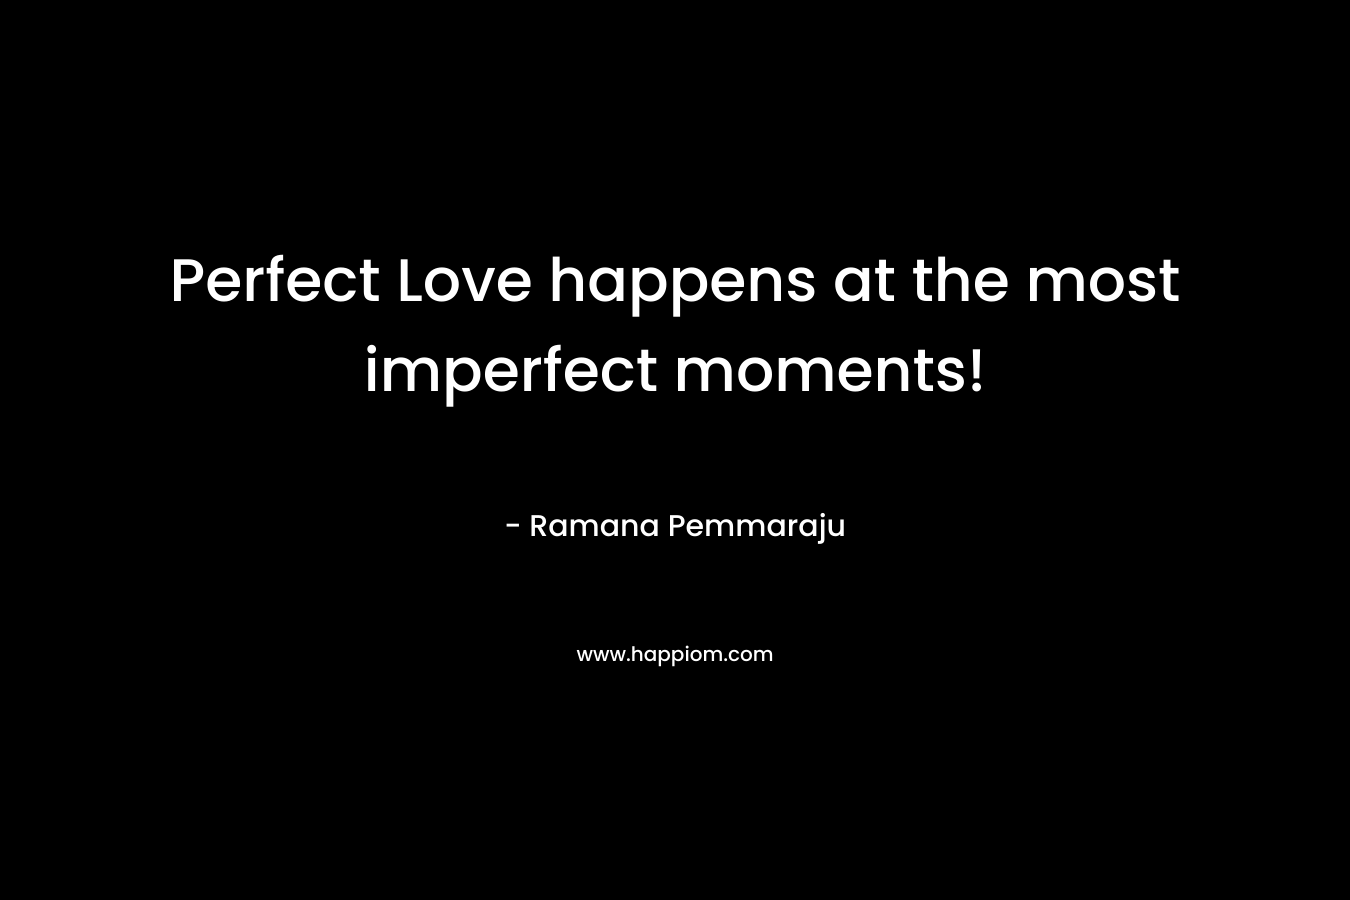 Perfect Love happens at the most imperfect moments!